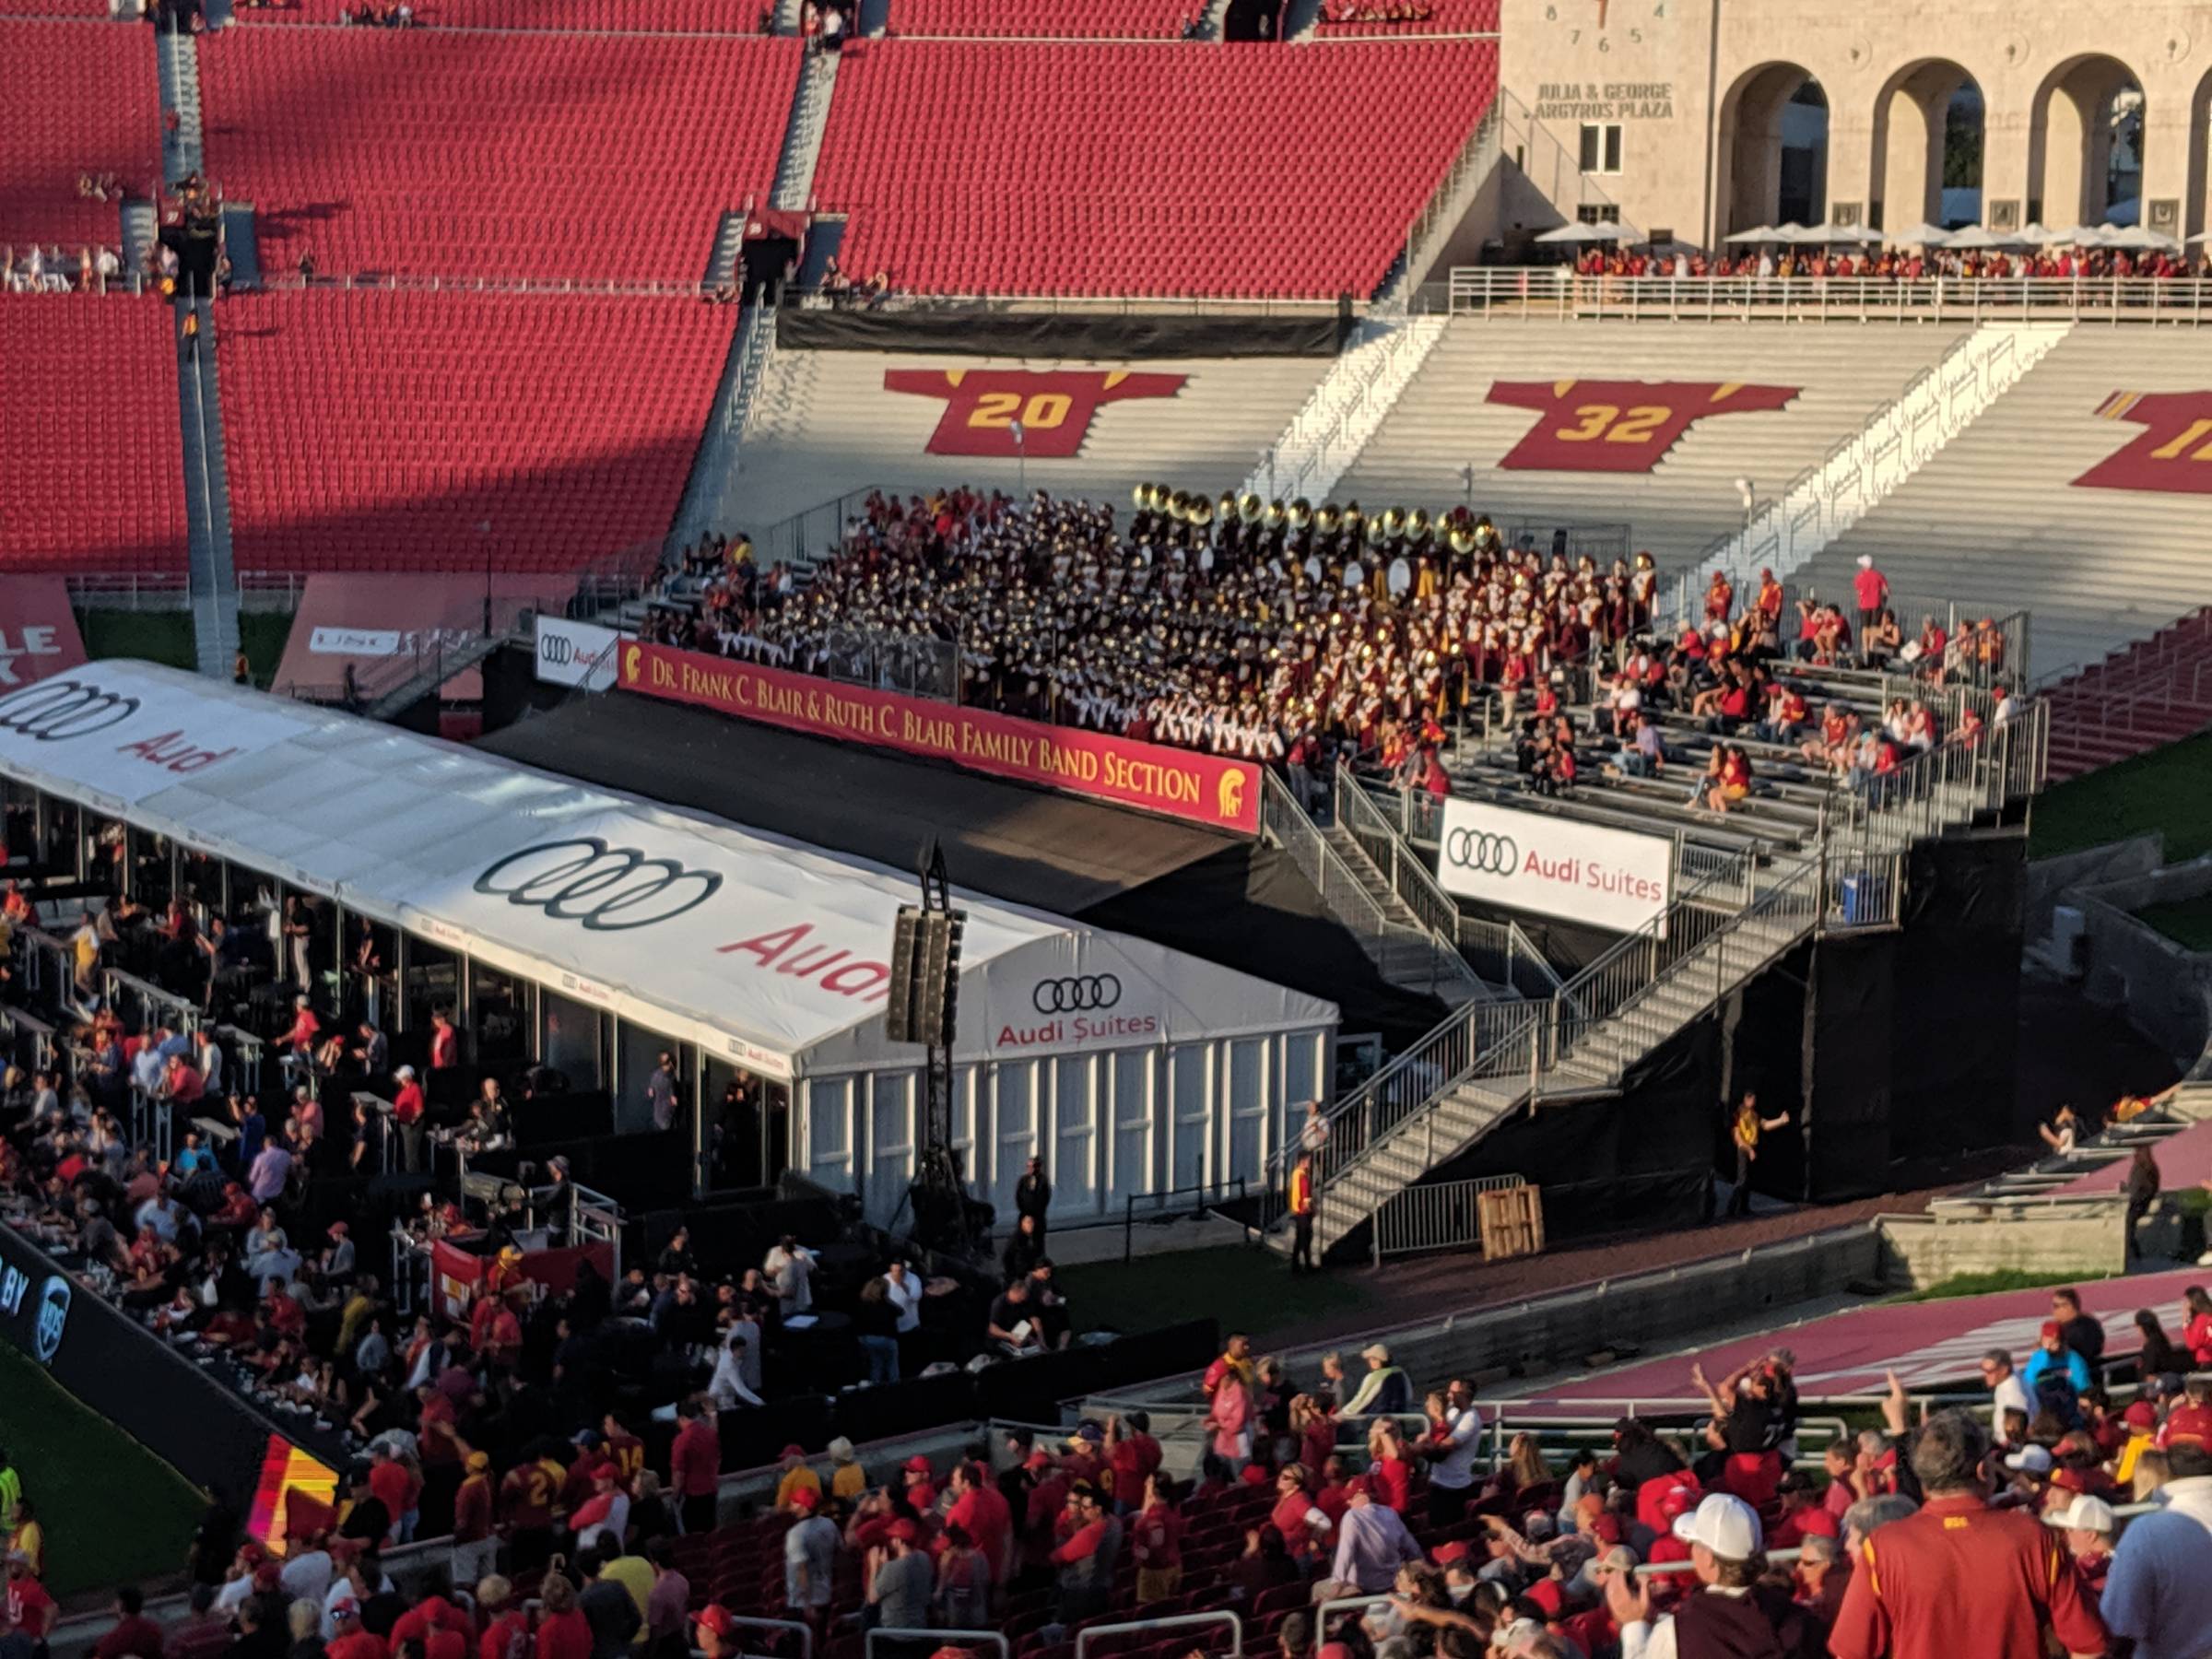 USC Band at the Coliseum